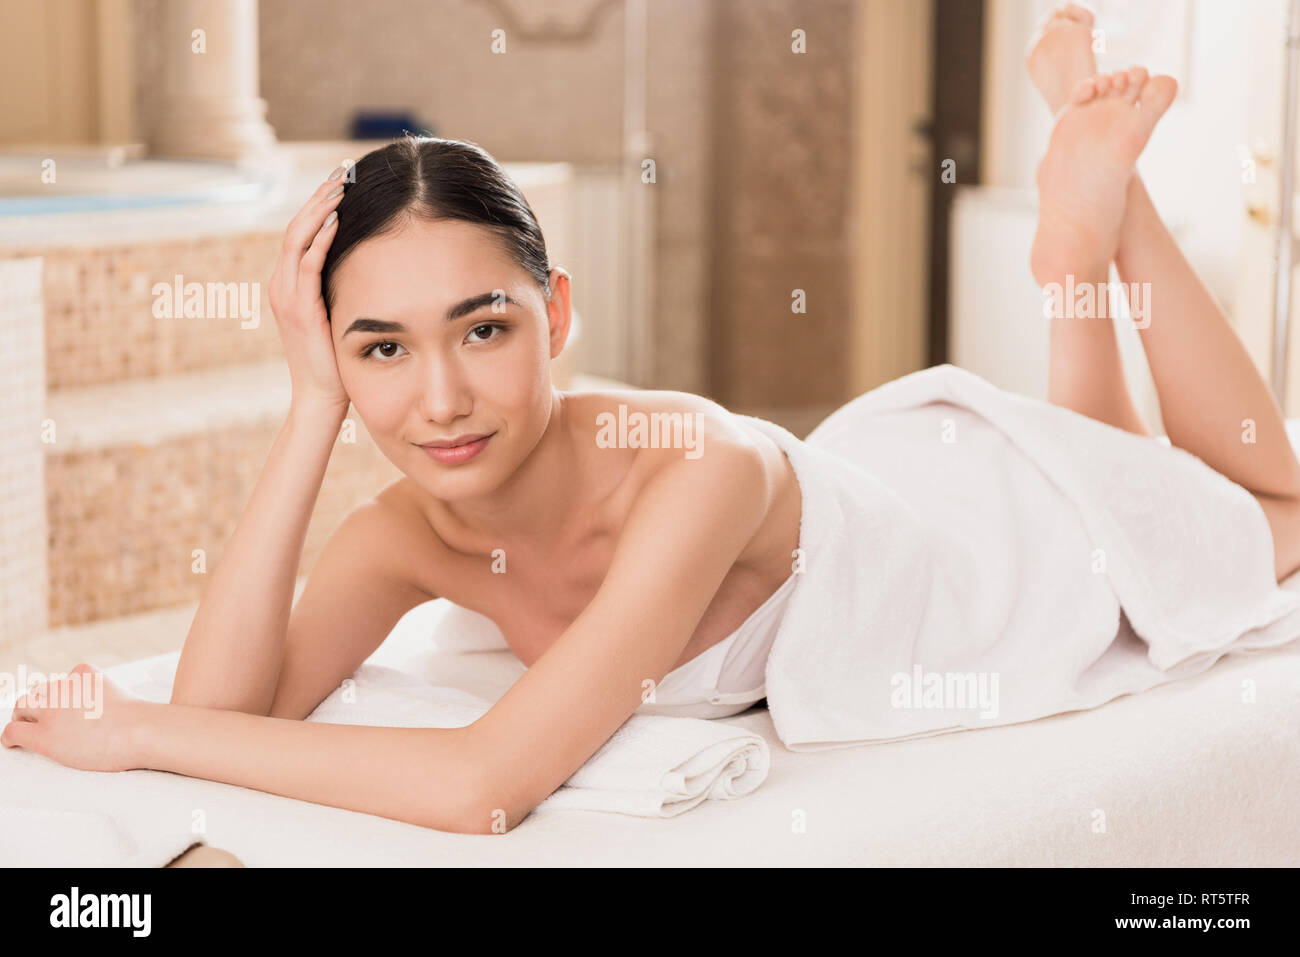 Beautiful Asian Woman In Towel Lying On Massage Table And Looking At